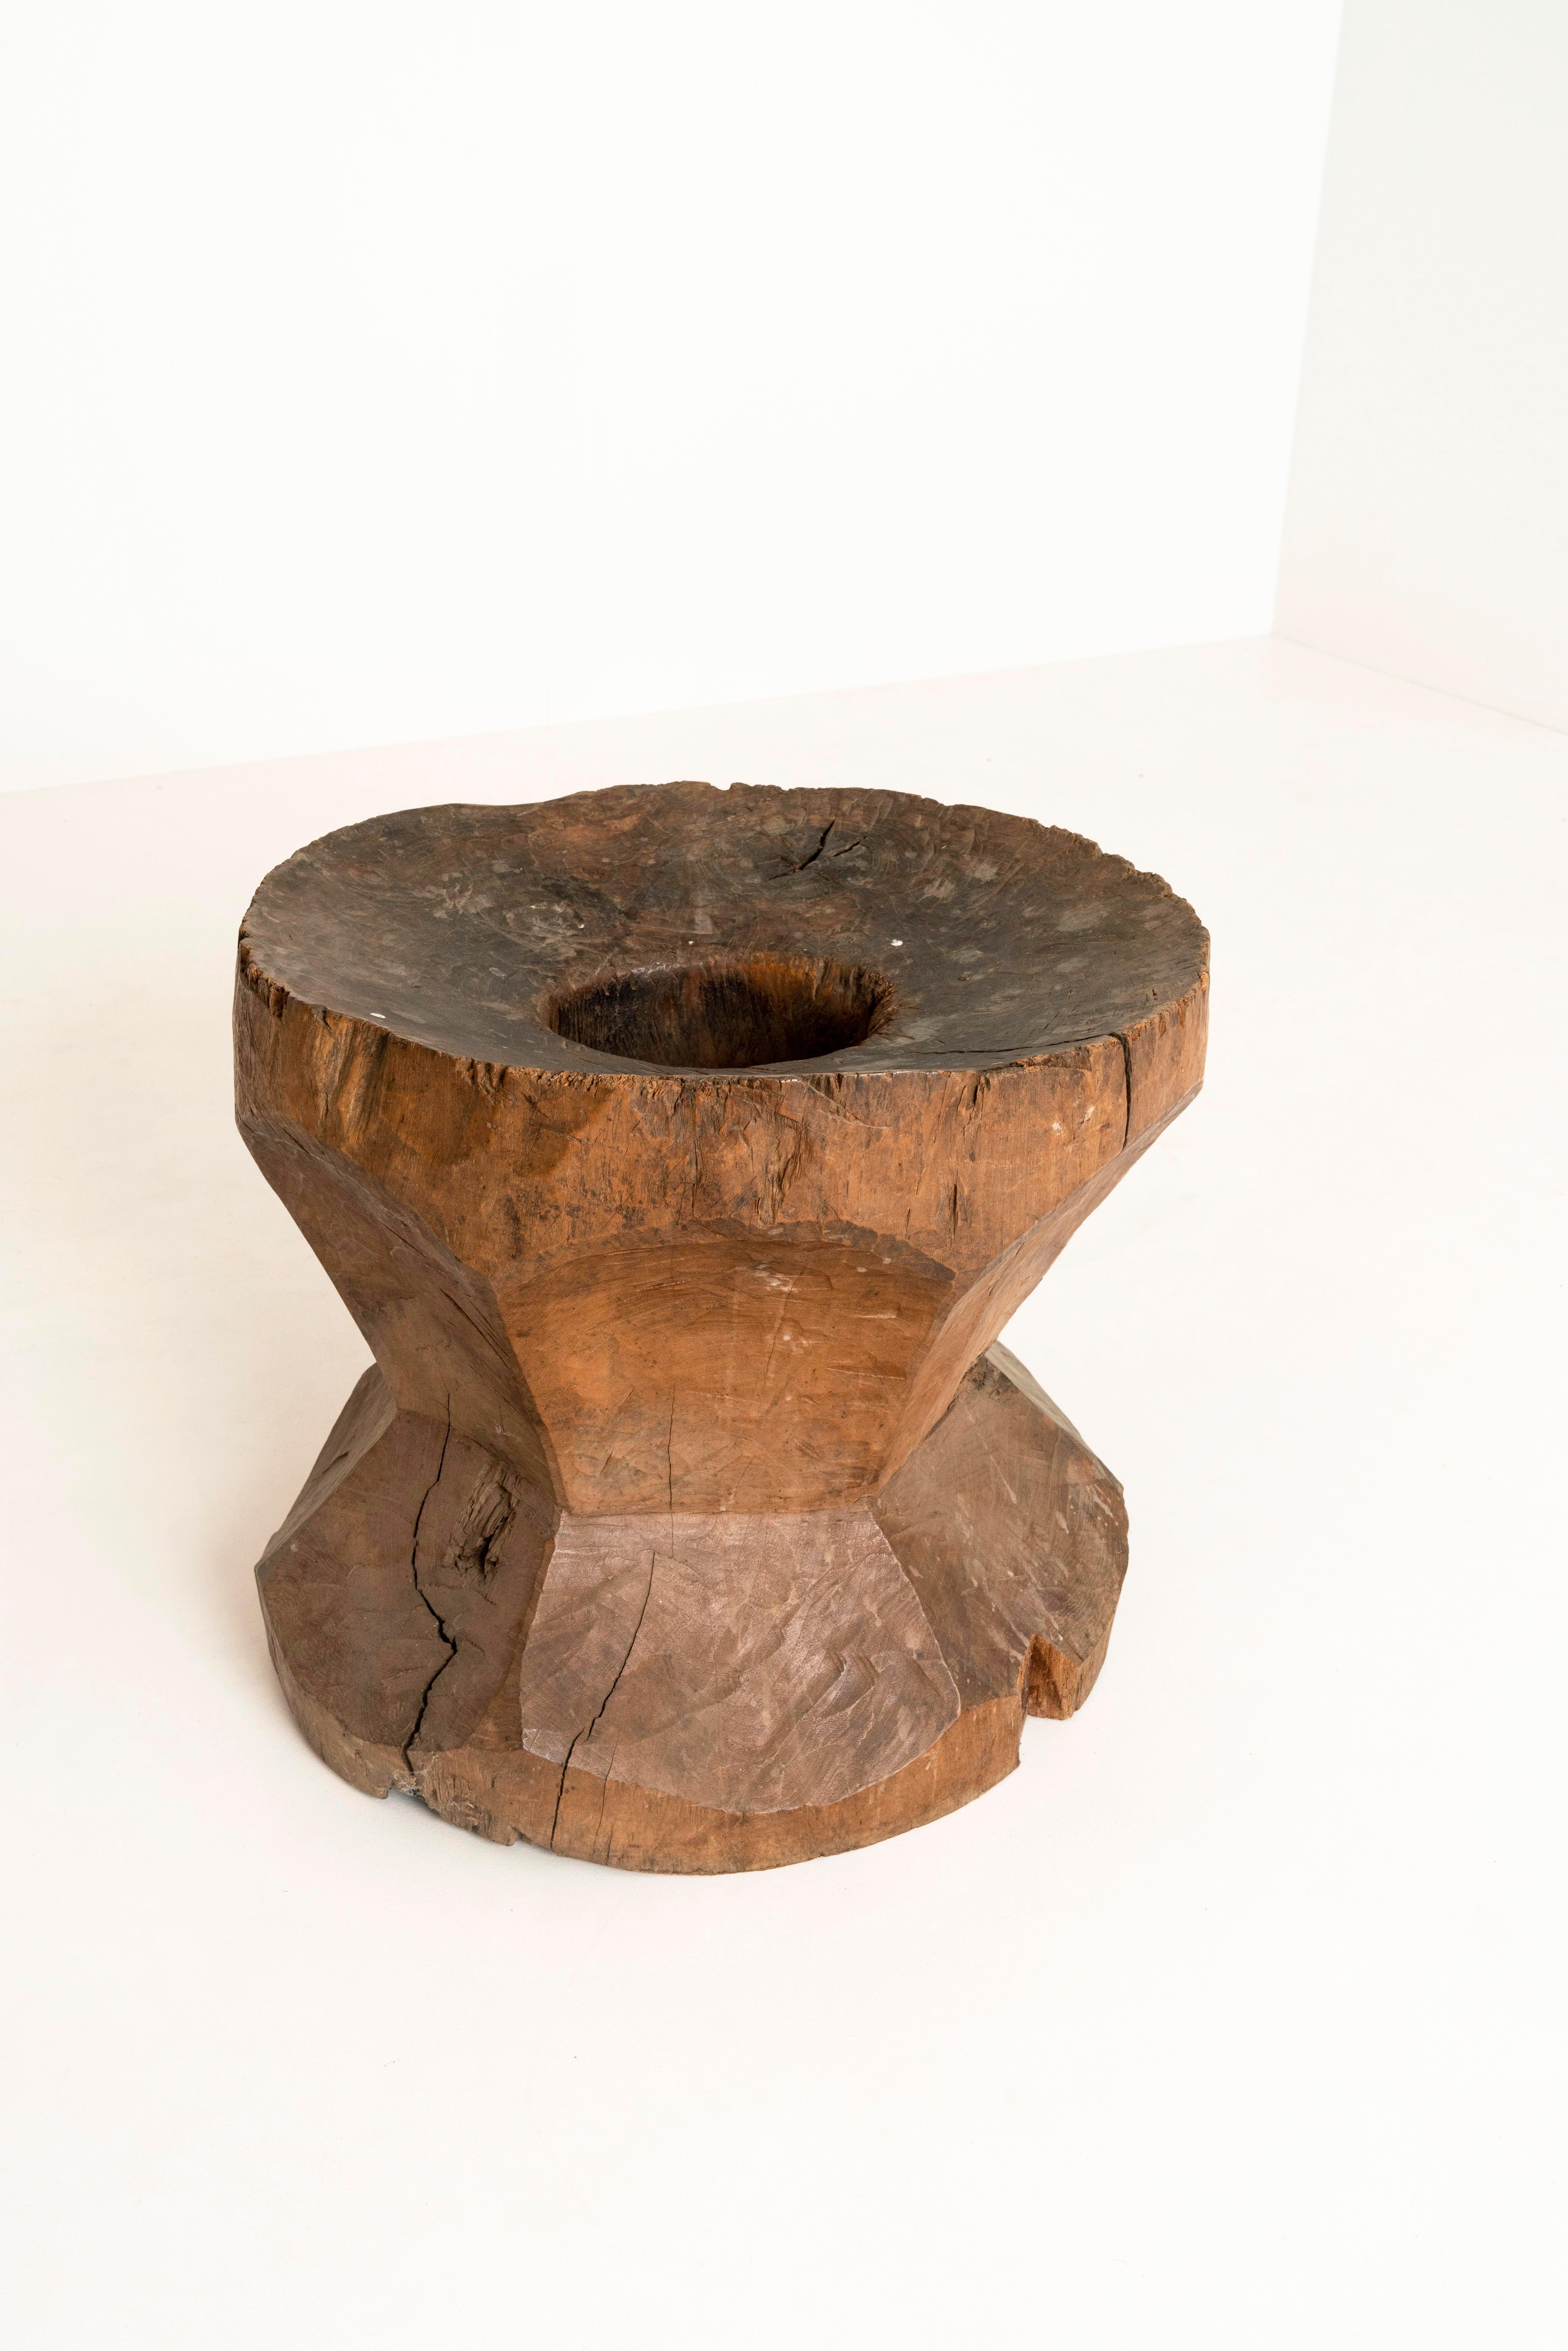 Large Decorative Antique Mortar of Wood In Fair Condition For Sale In Hellouw, NL